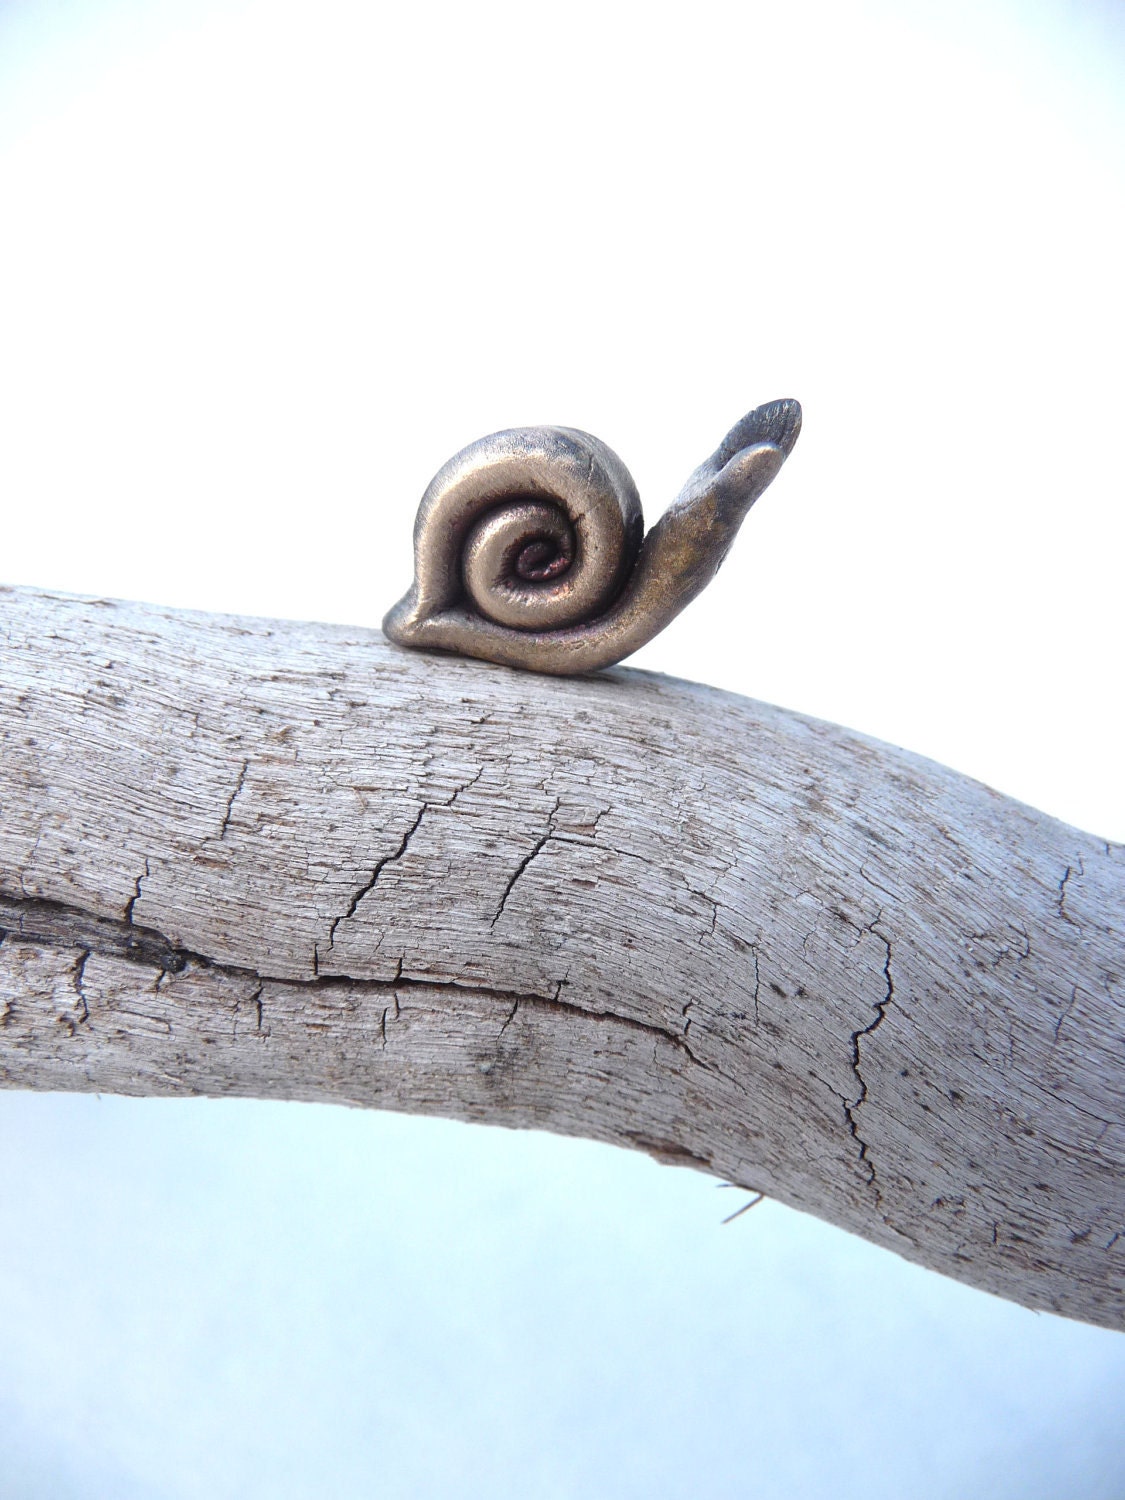 Snail figurine made by hand from pure bronze - DreamofaDream